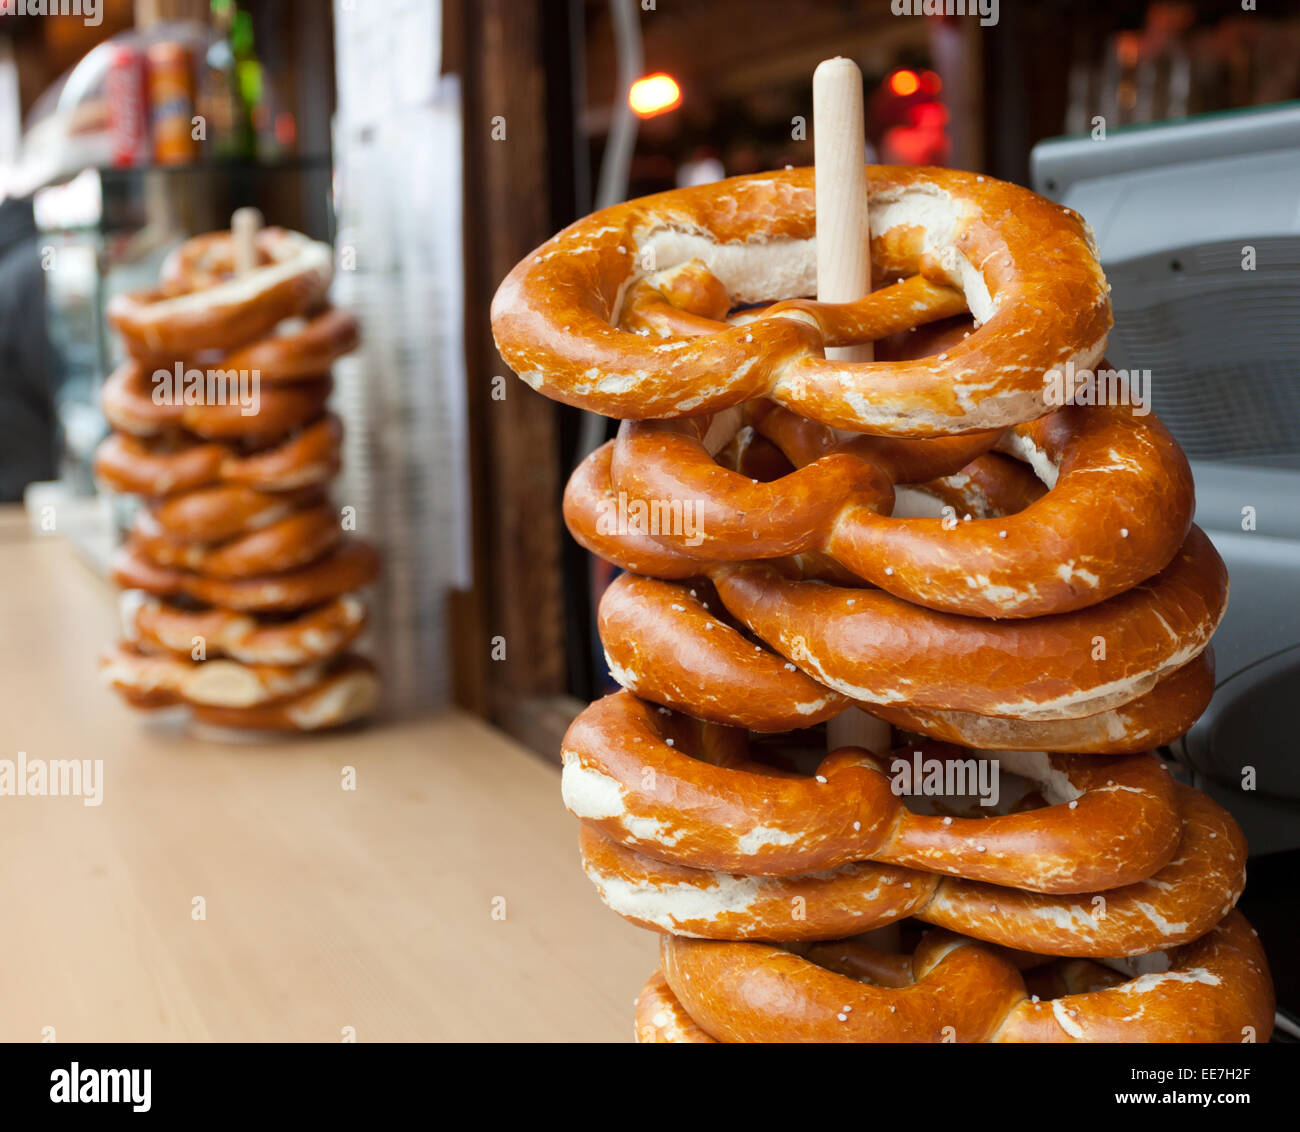 Sale of typical pretzel in a Christmas market. Stock Photo